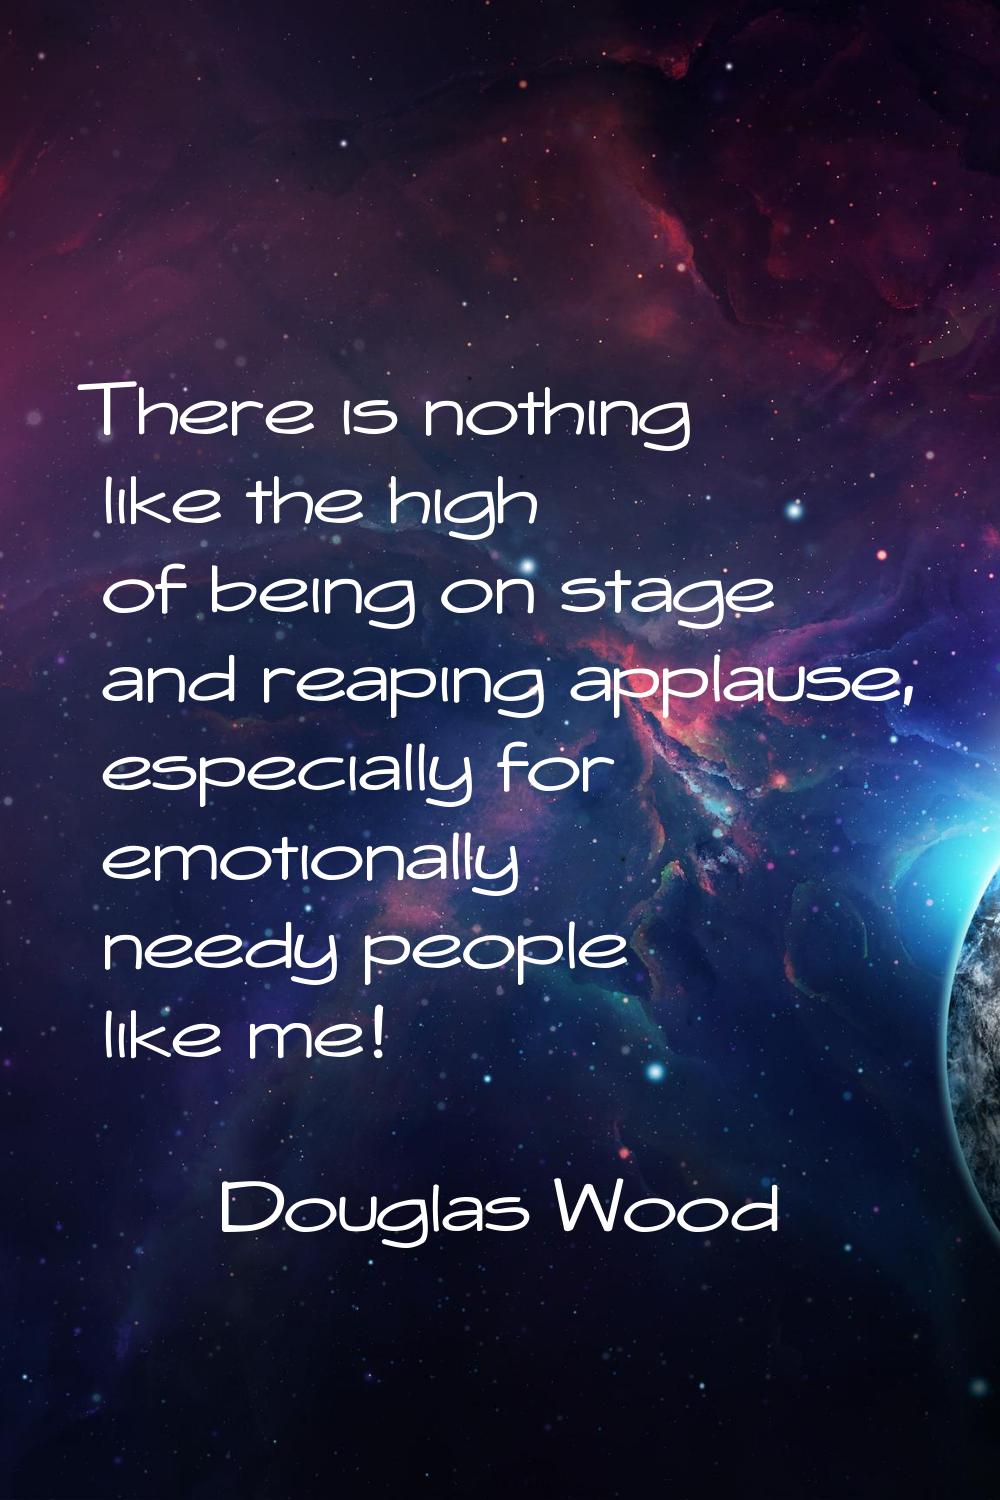 There is nothing like the high of being on stage and reaping applause, especially for emotionally n